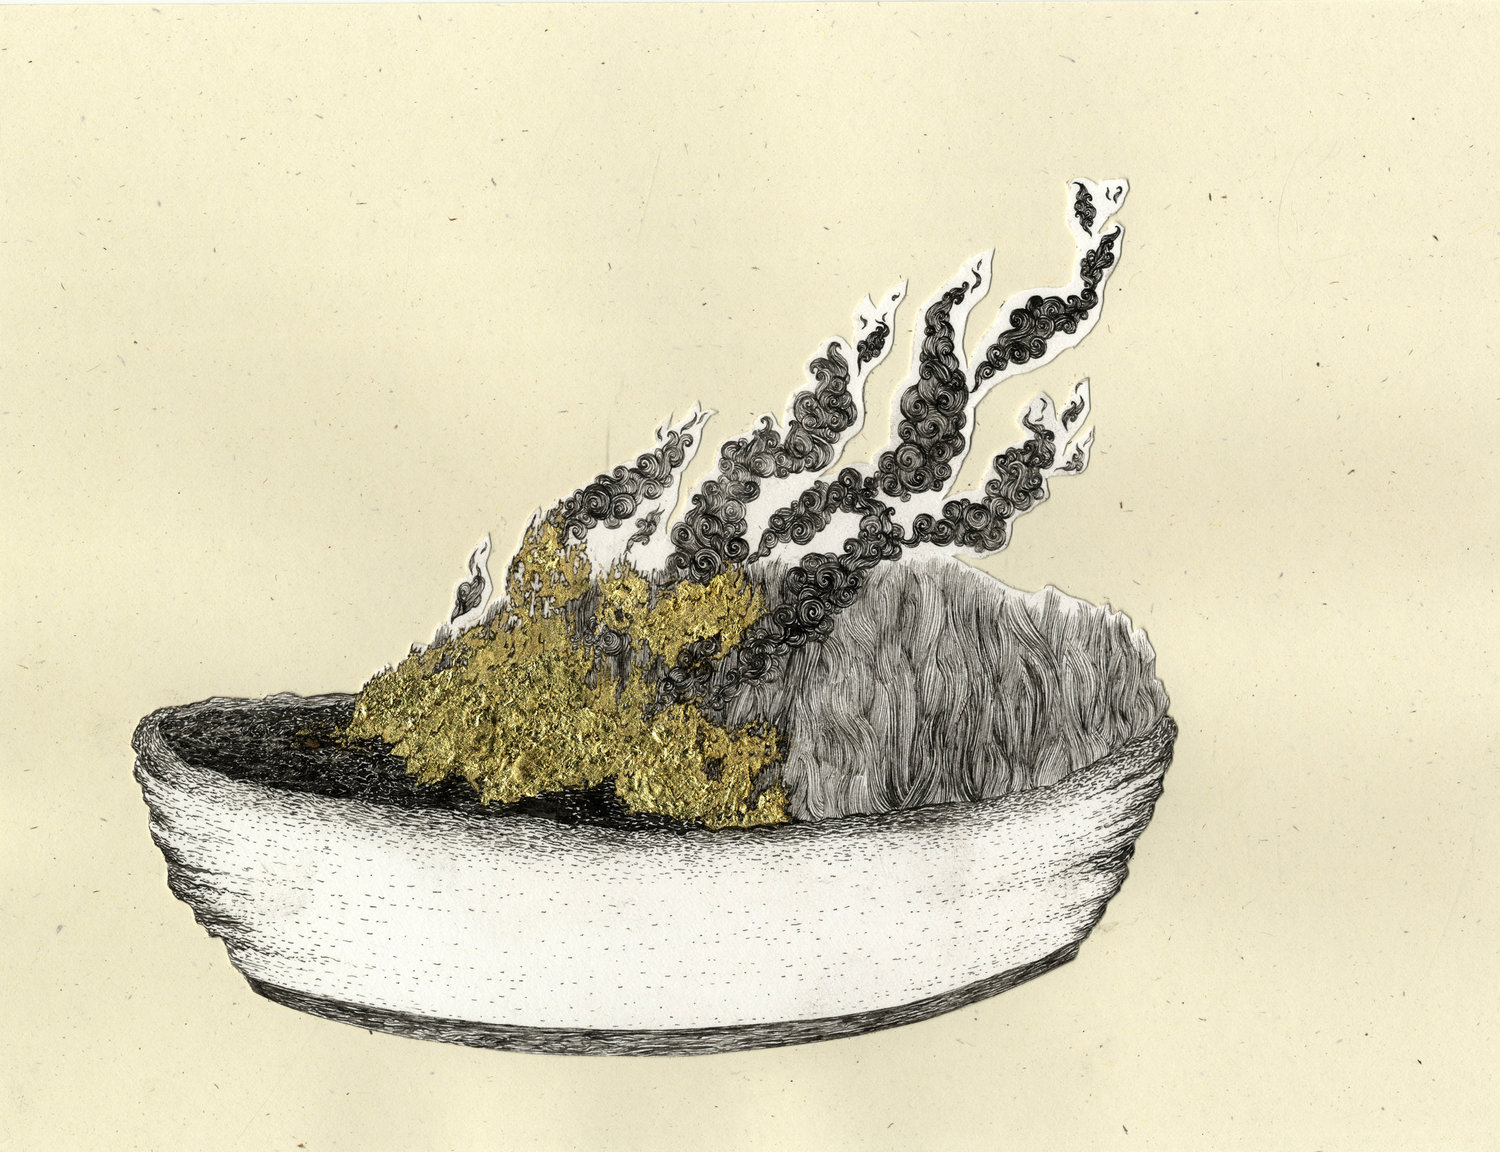 drawing of a bowl- inside the bowl is a brushfire. the fire is gold leaf